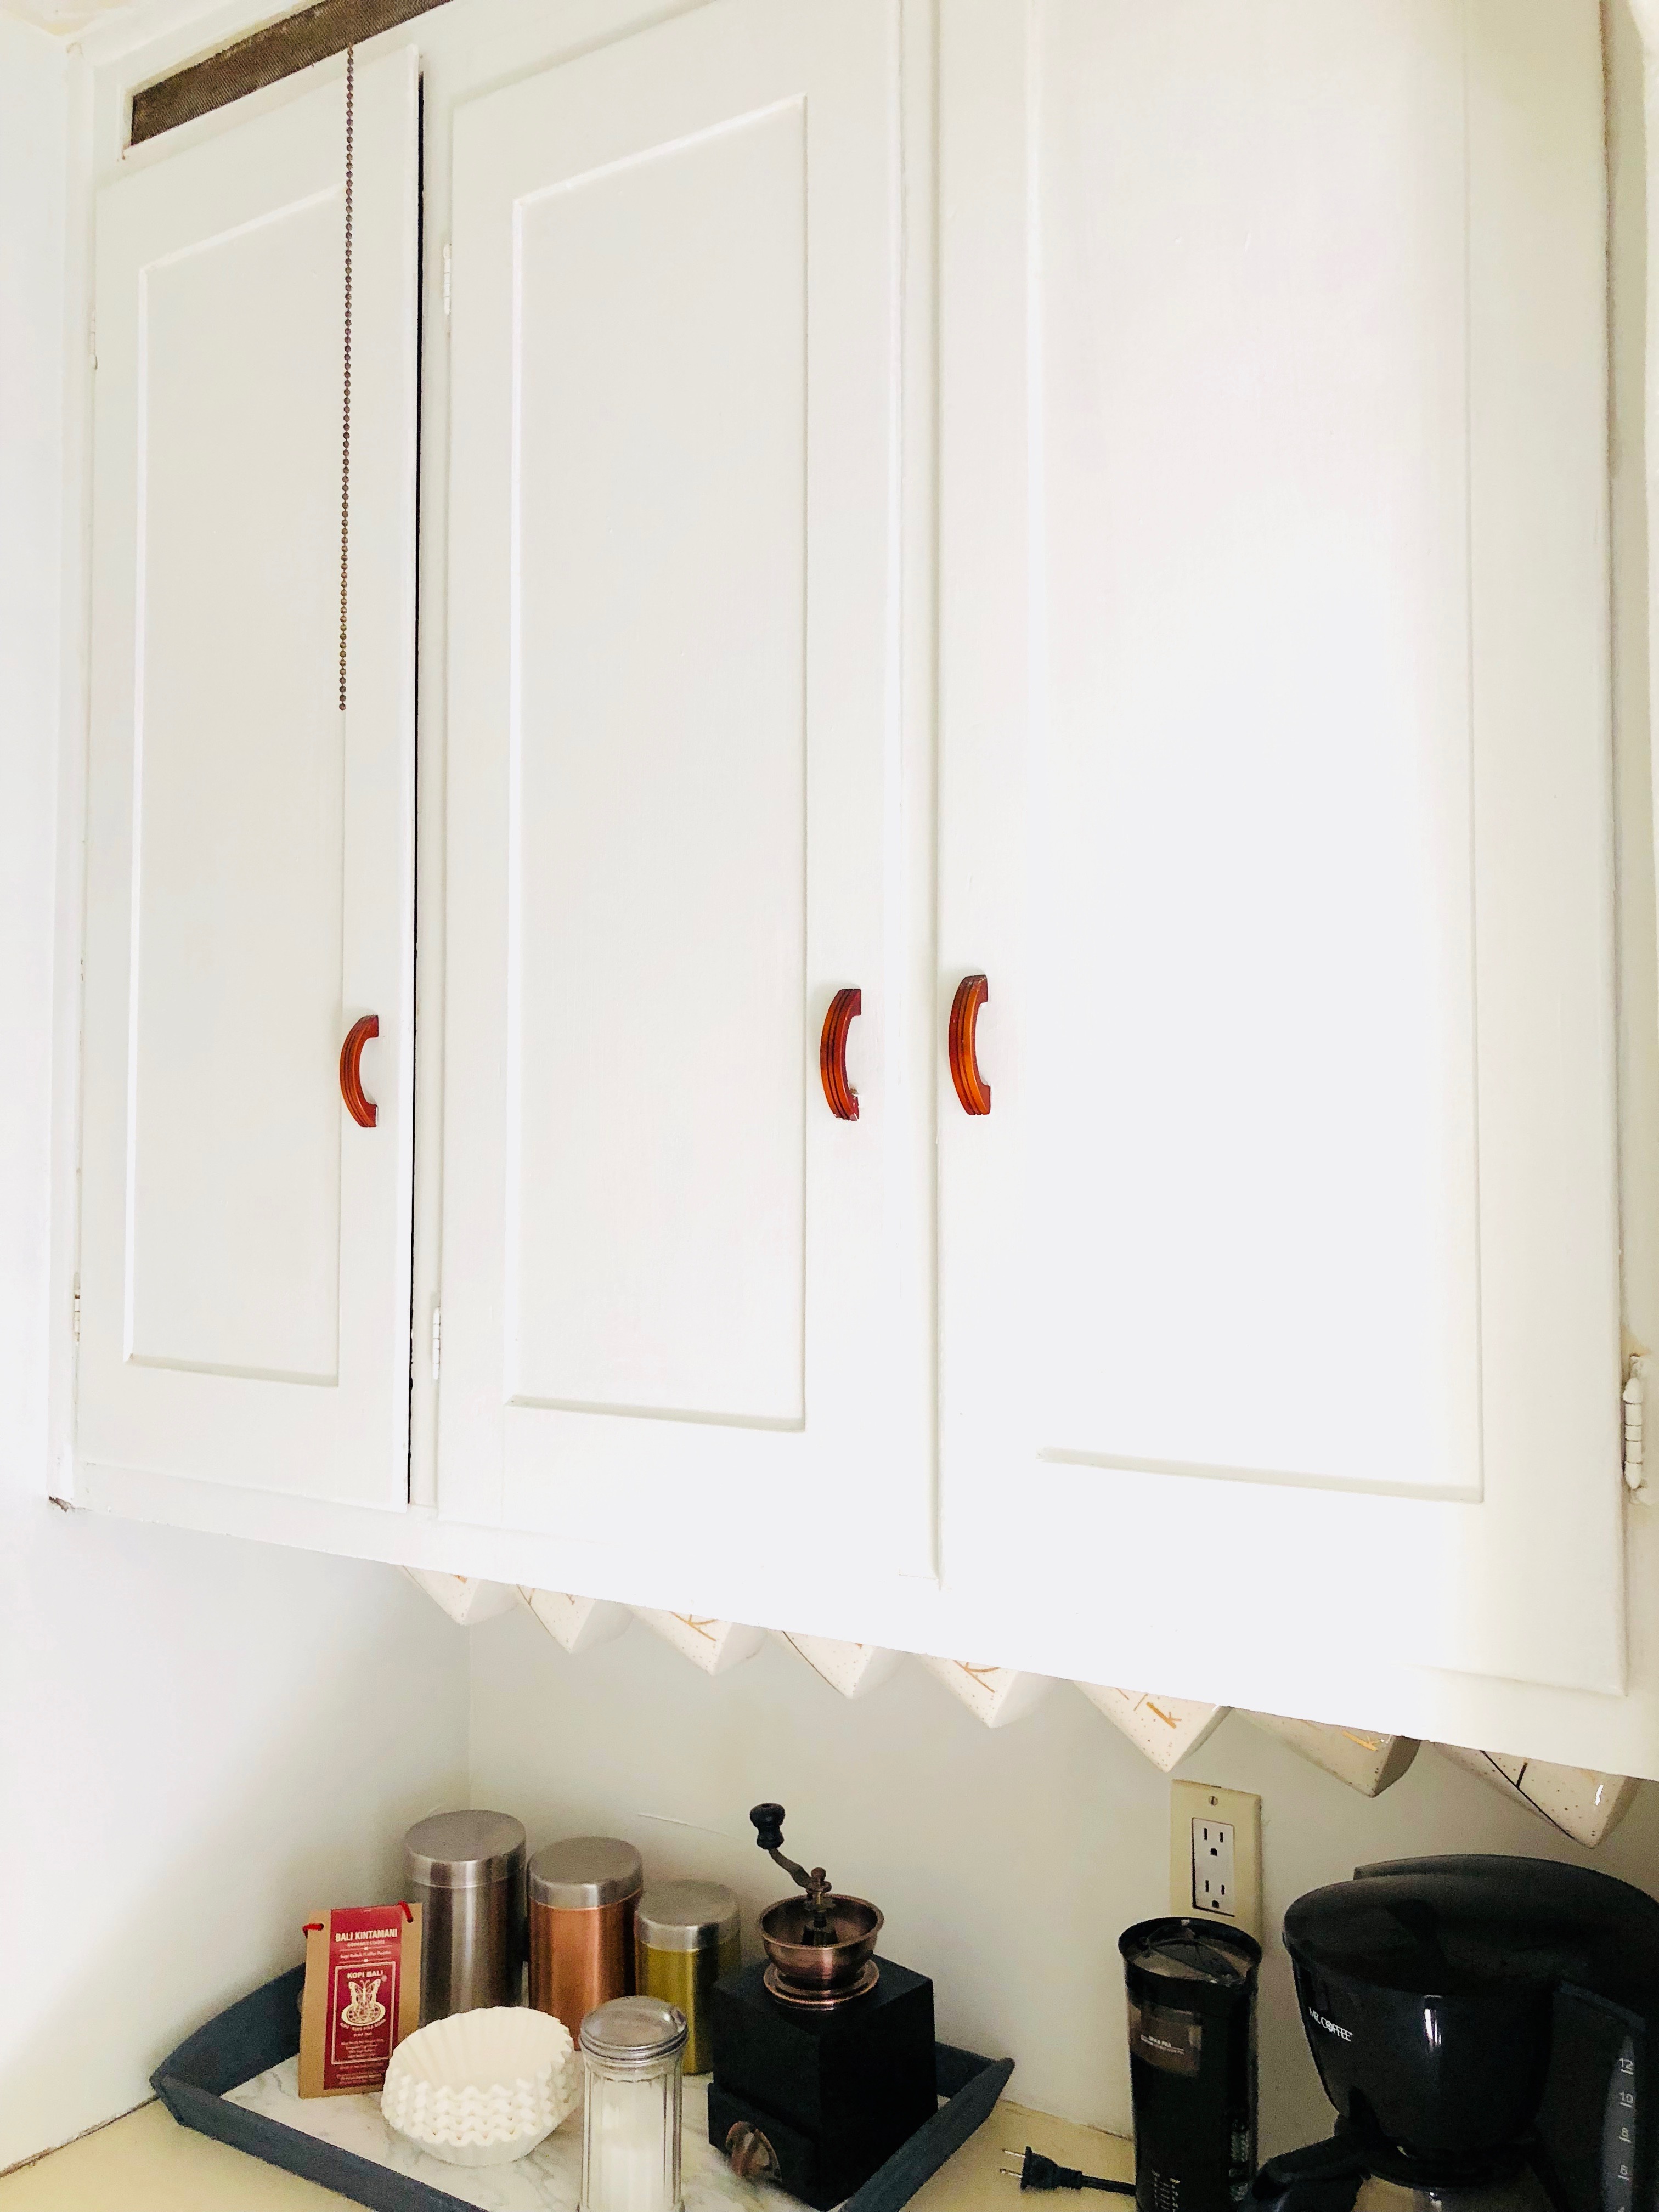 kitchen cabinets with a fresh coat of paint